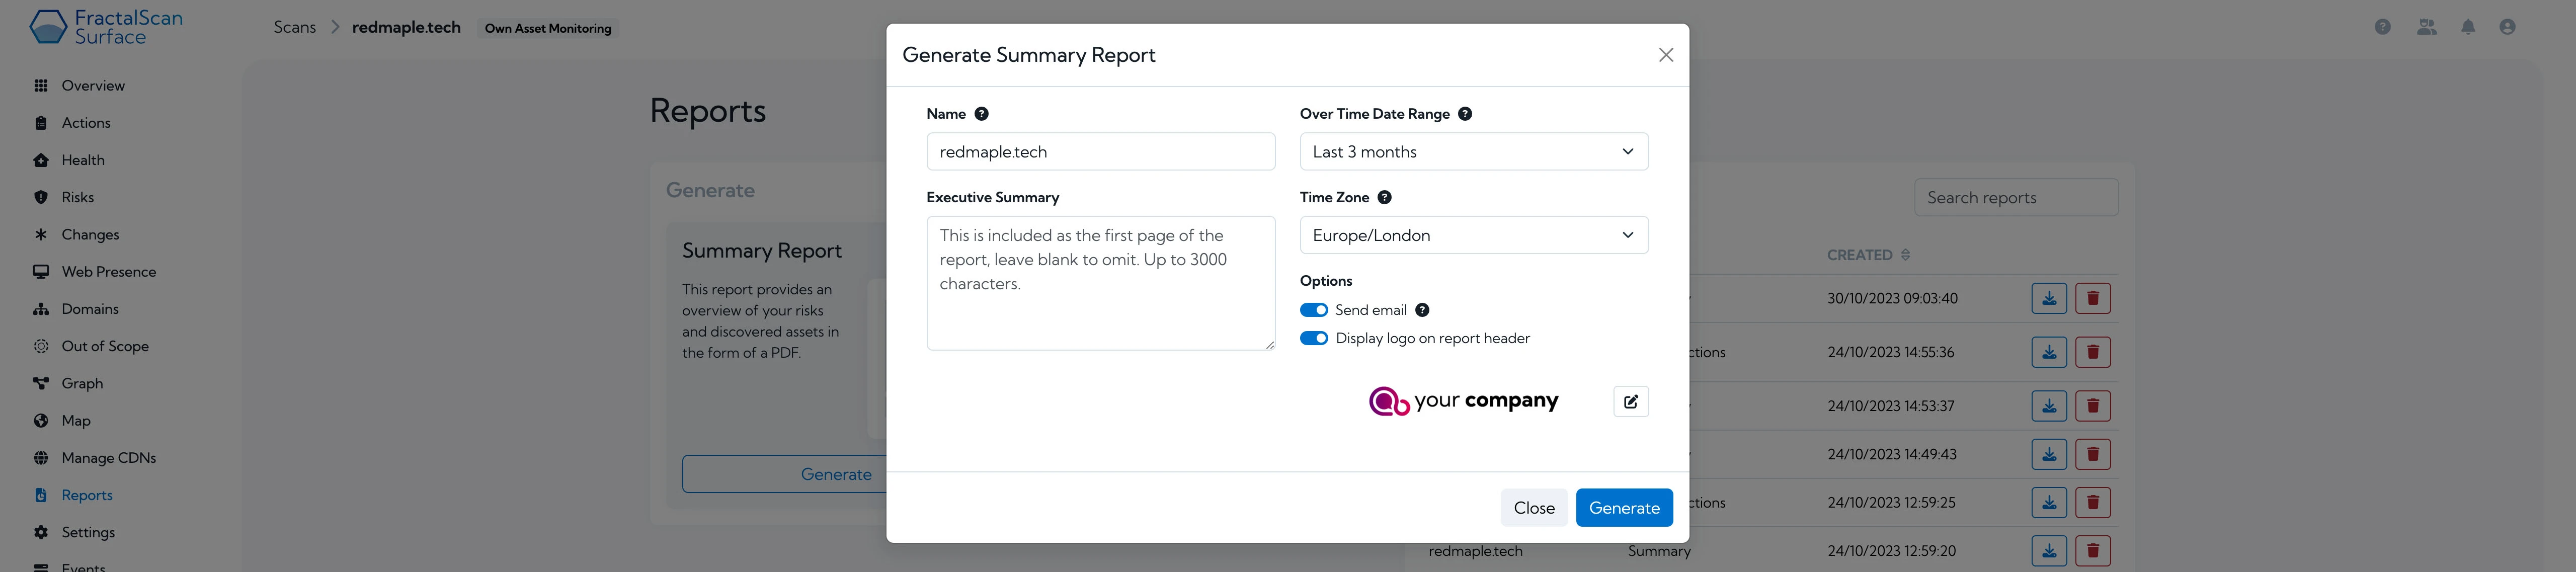 Generate co-branded report summary screen